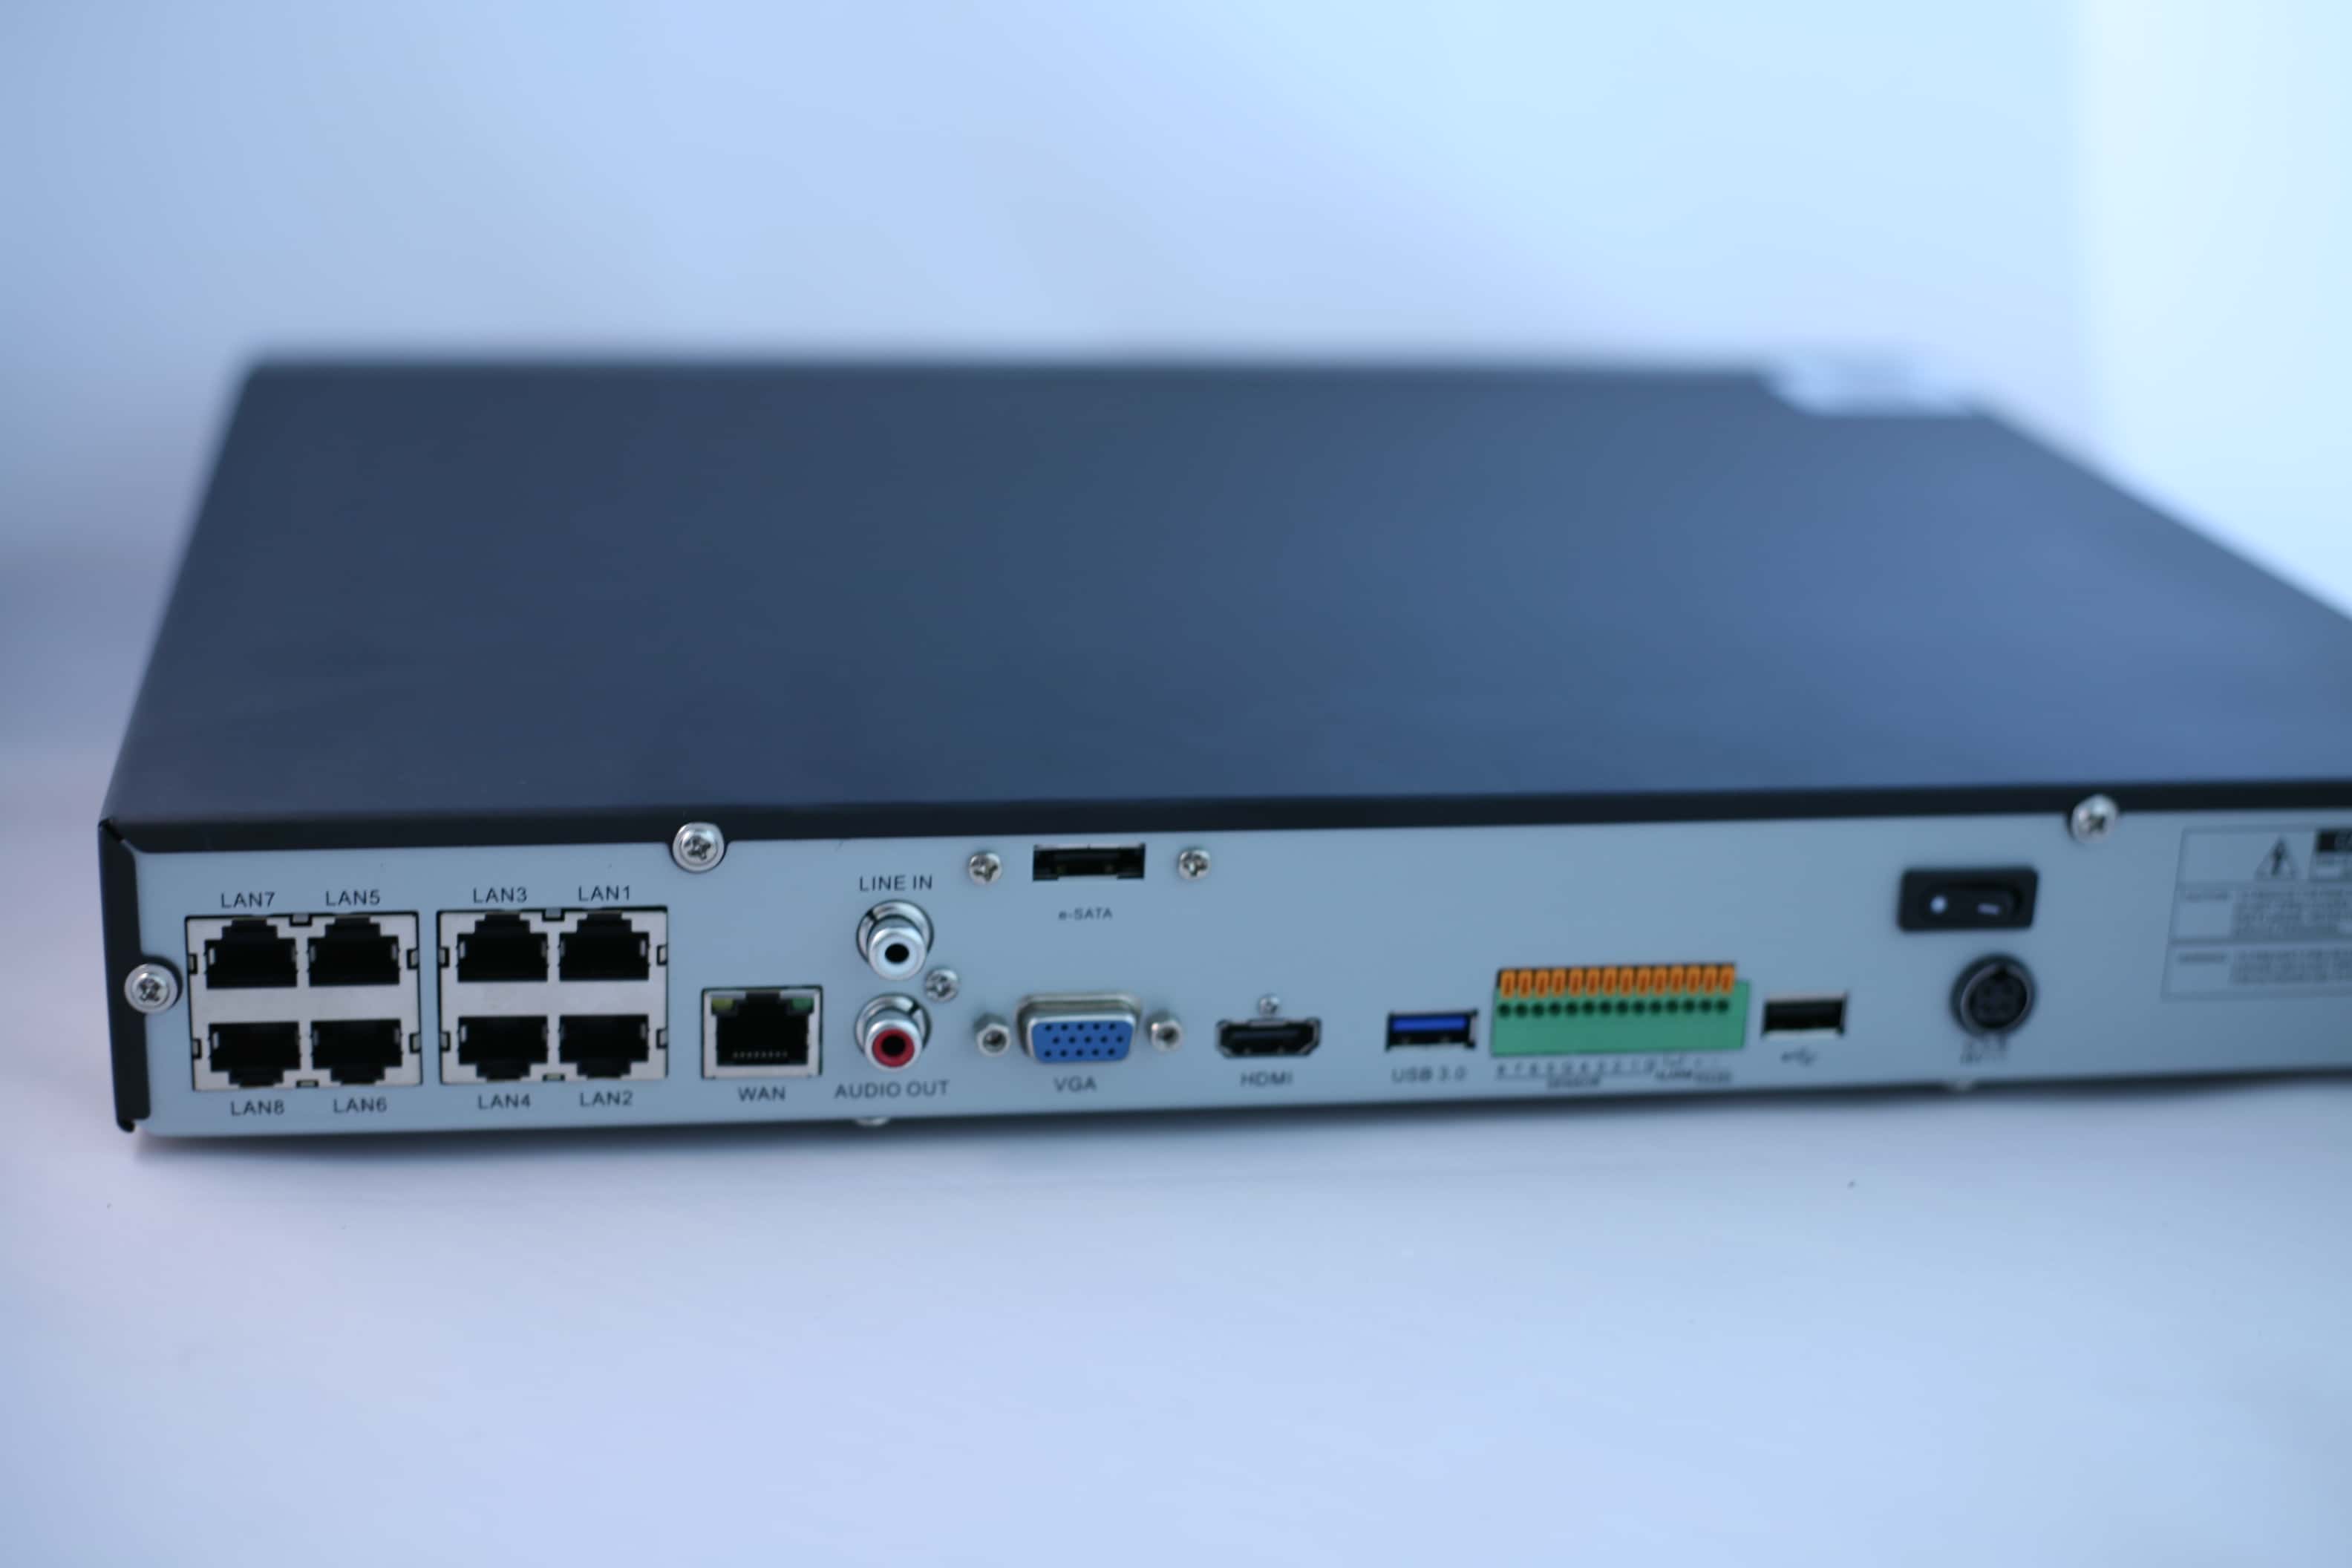 (image for) Secware Pro H.265 8 Channel NVR with 8 POE no HDD - Click Image to Close